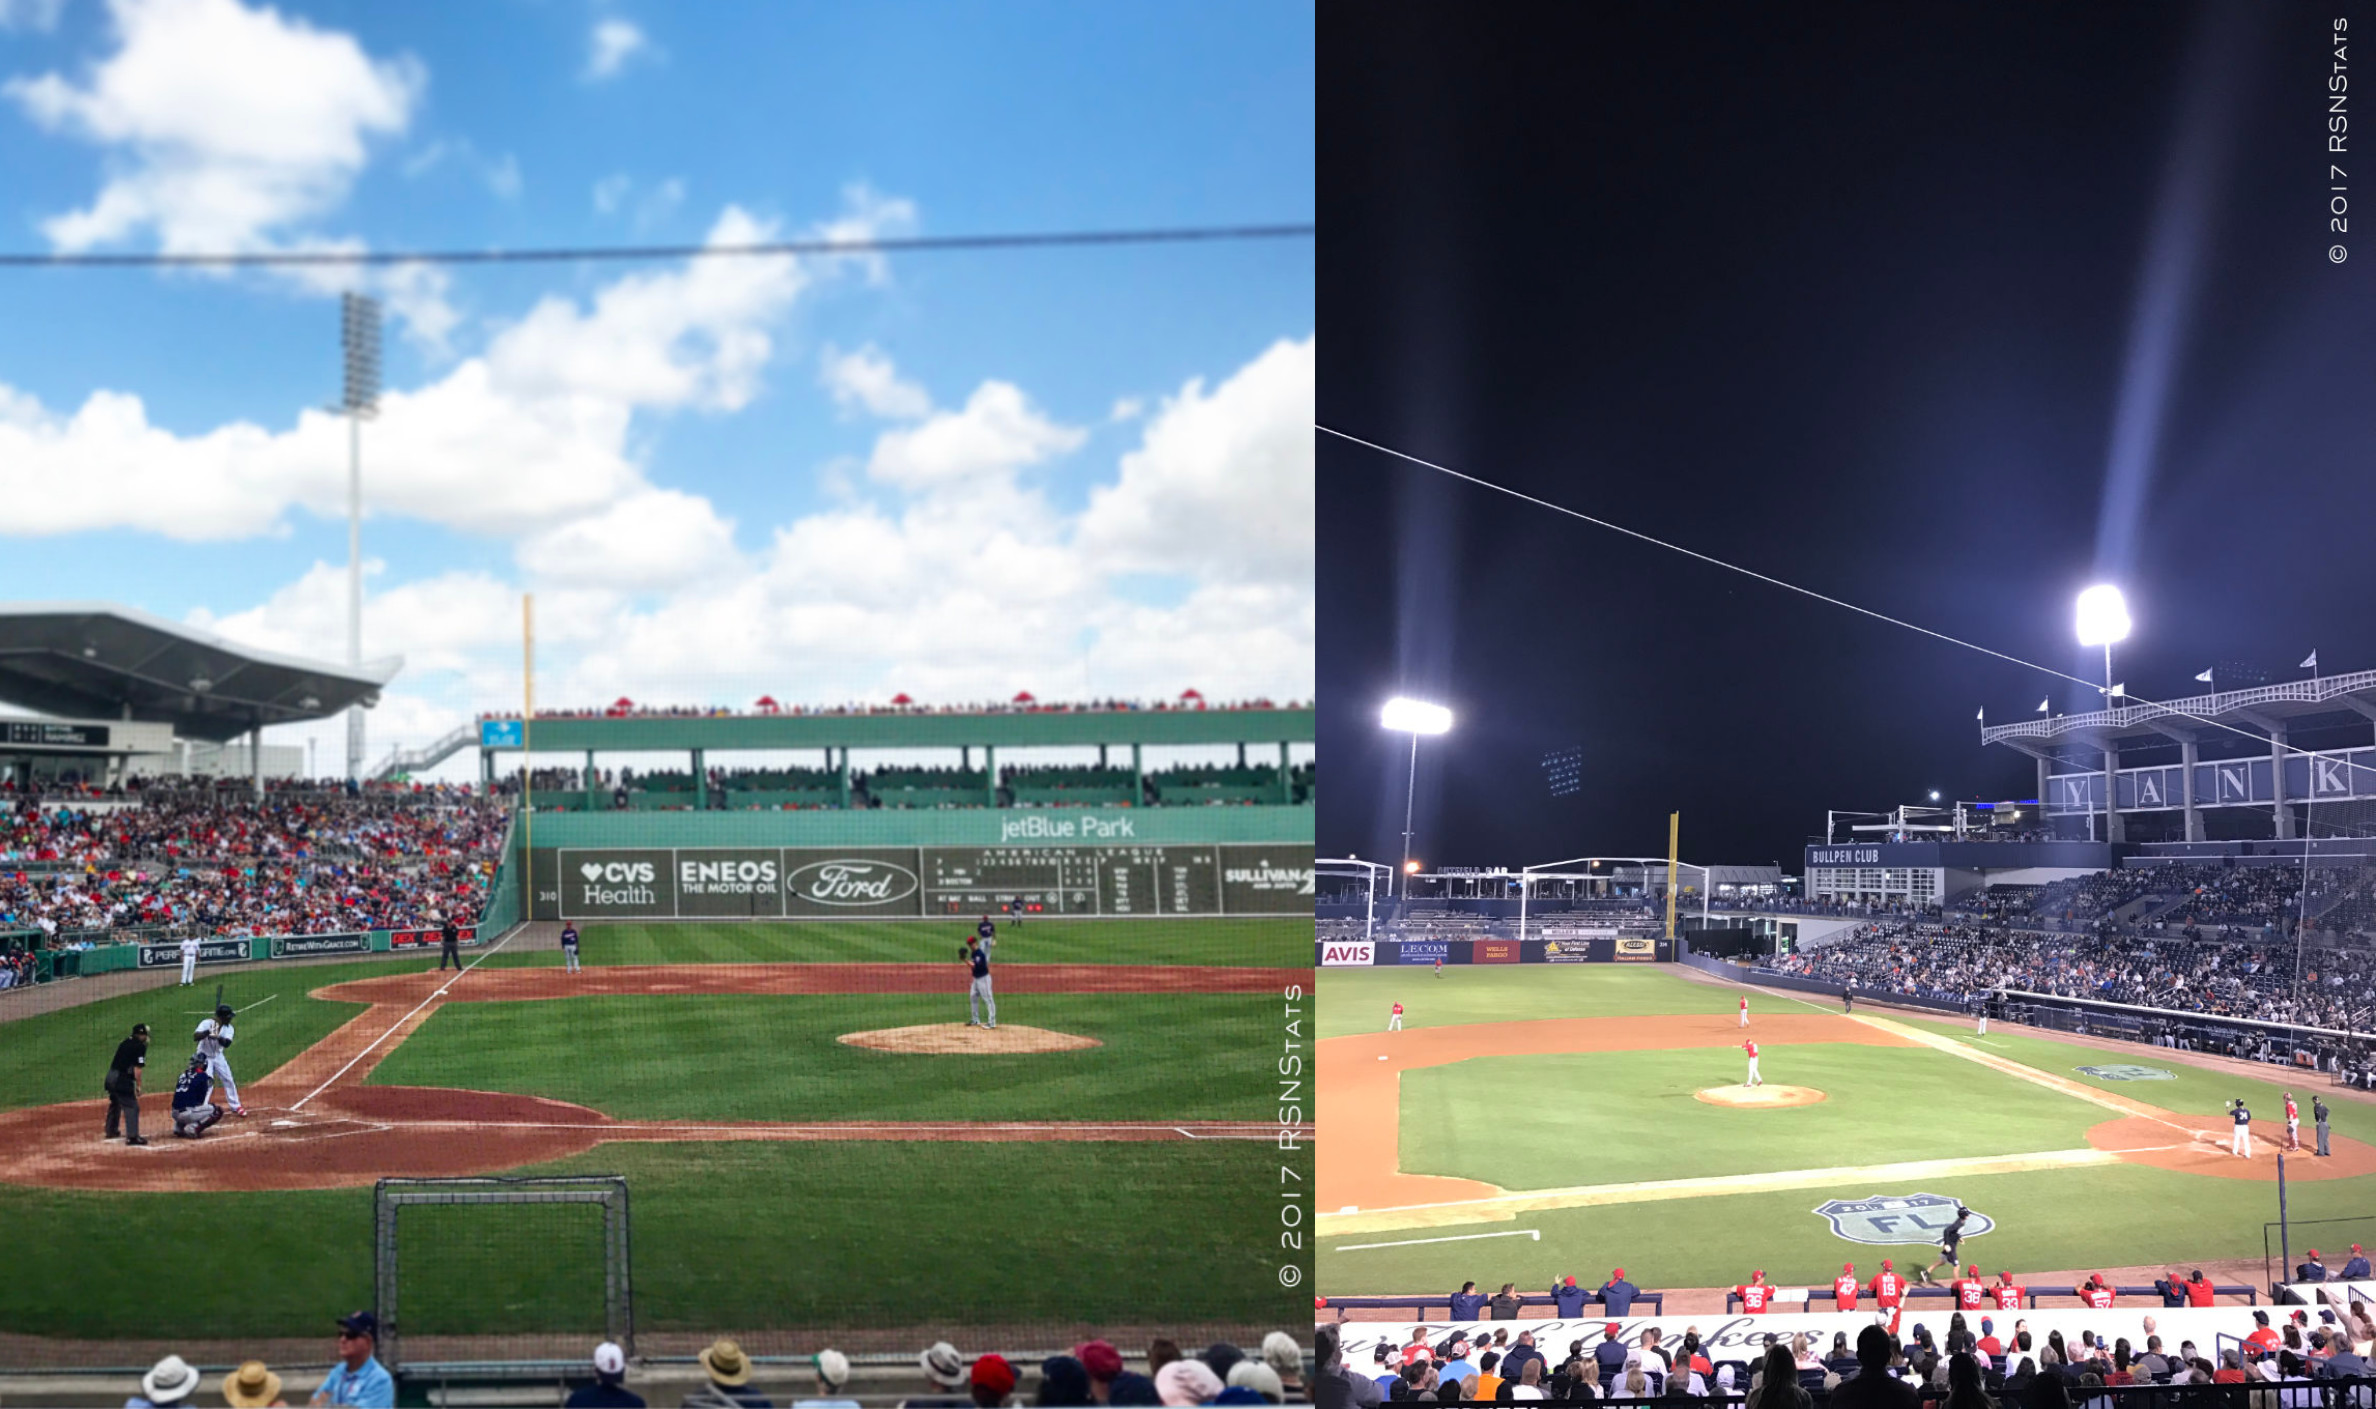 Red Sox Spring Training at home and on the road.